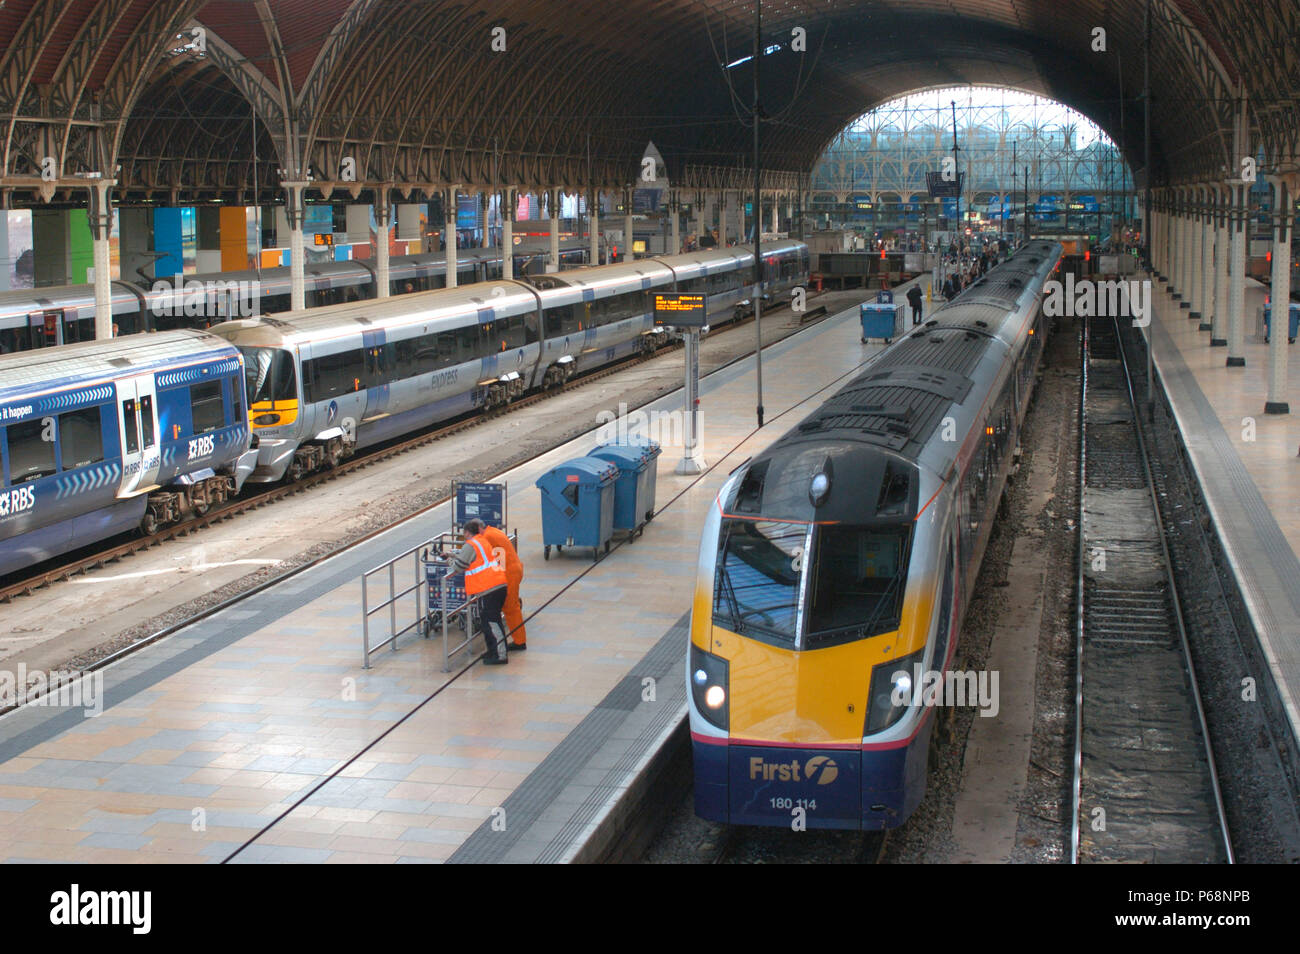 The Great Western Railway. Paddington station. View under trainshed with [ left ] Heathrow Express and [ right ] Great Western services awaiting depar Stock Photo